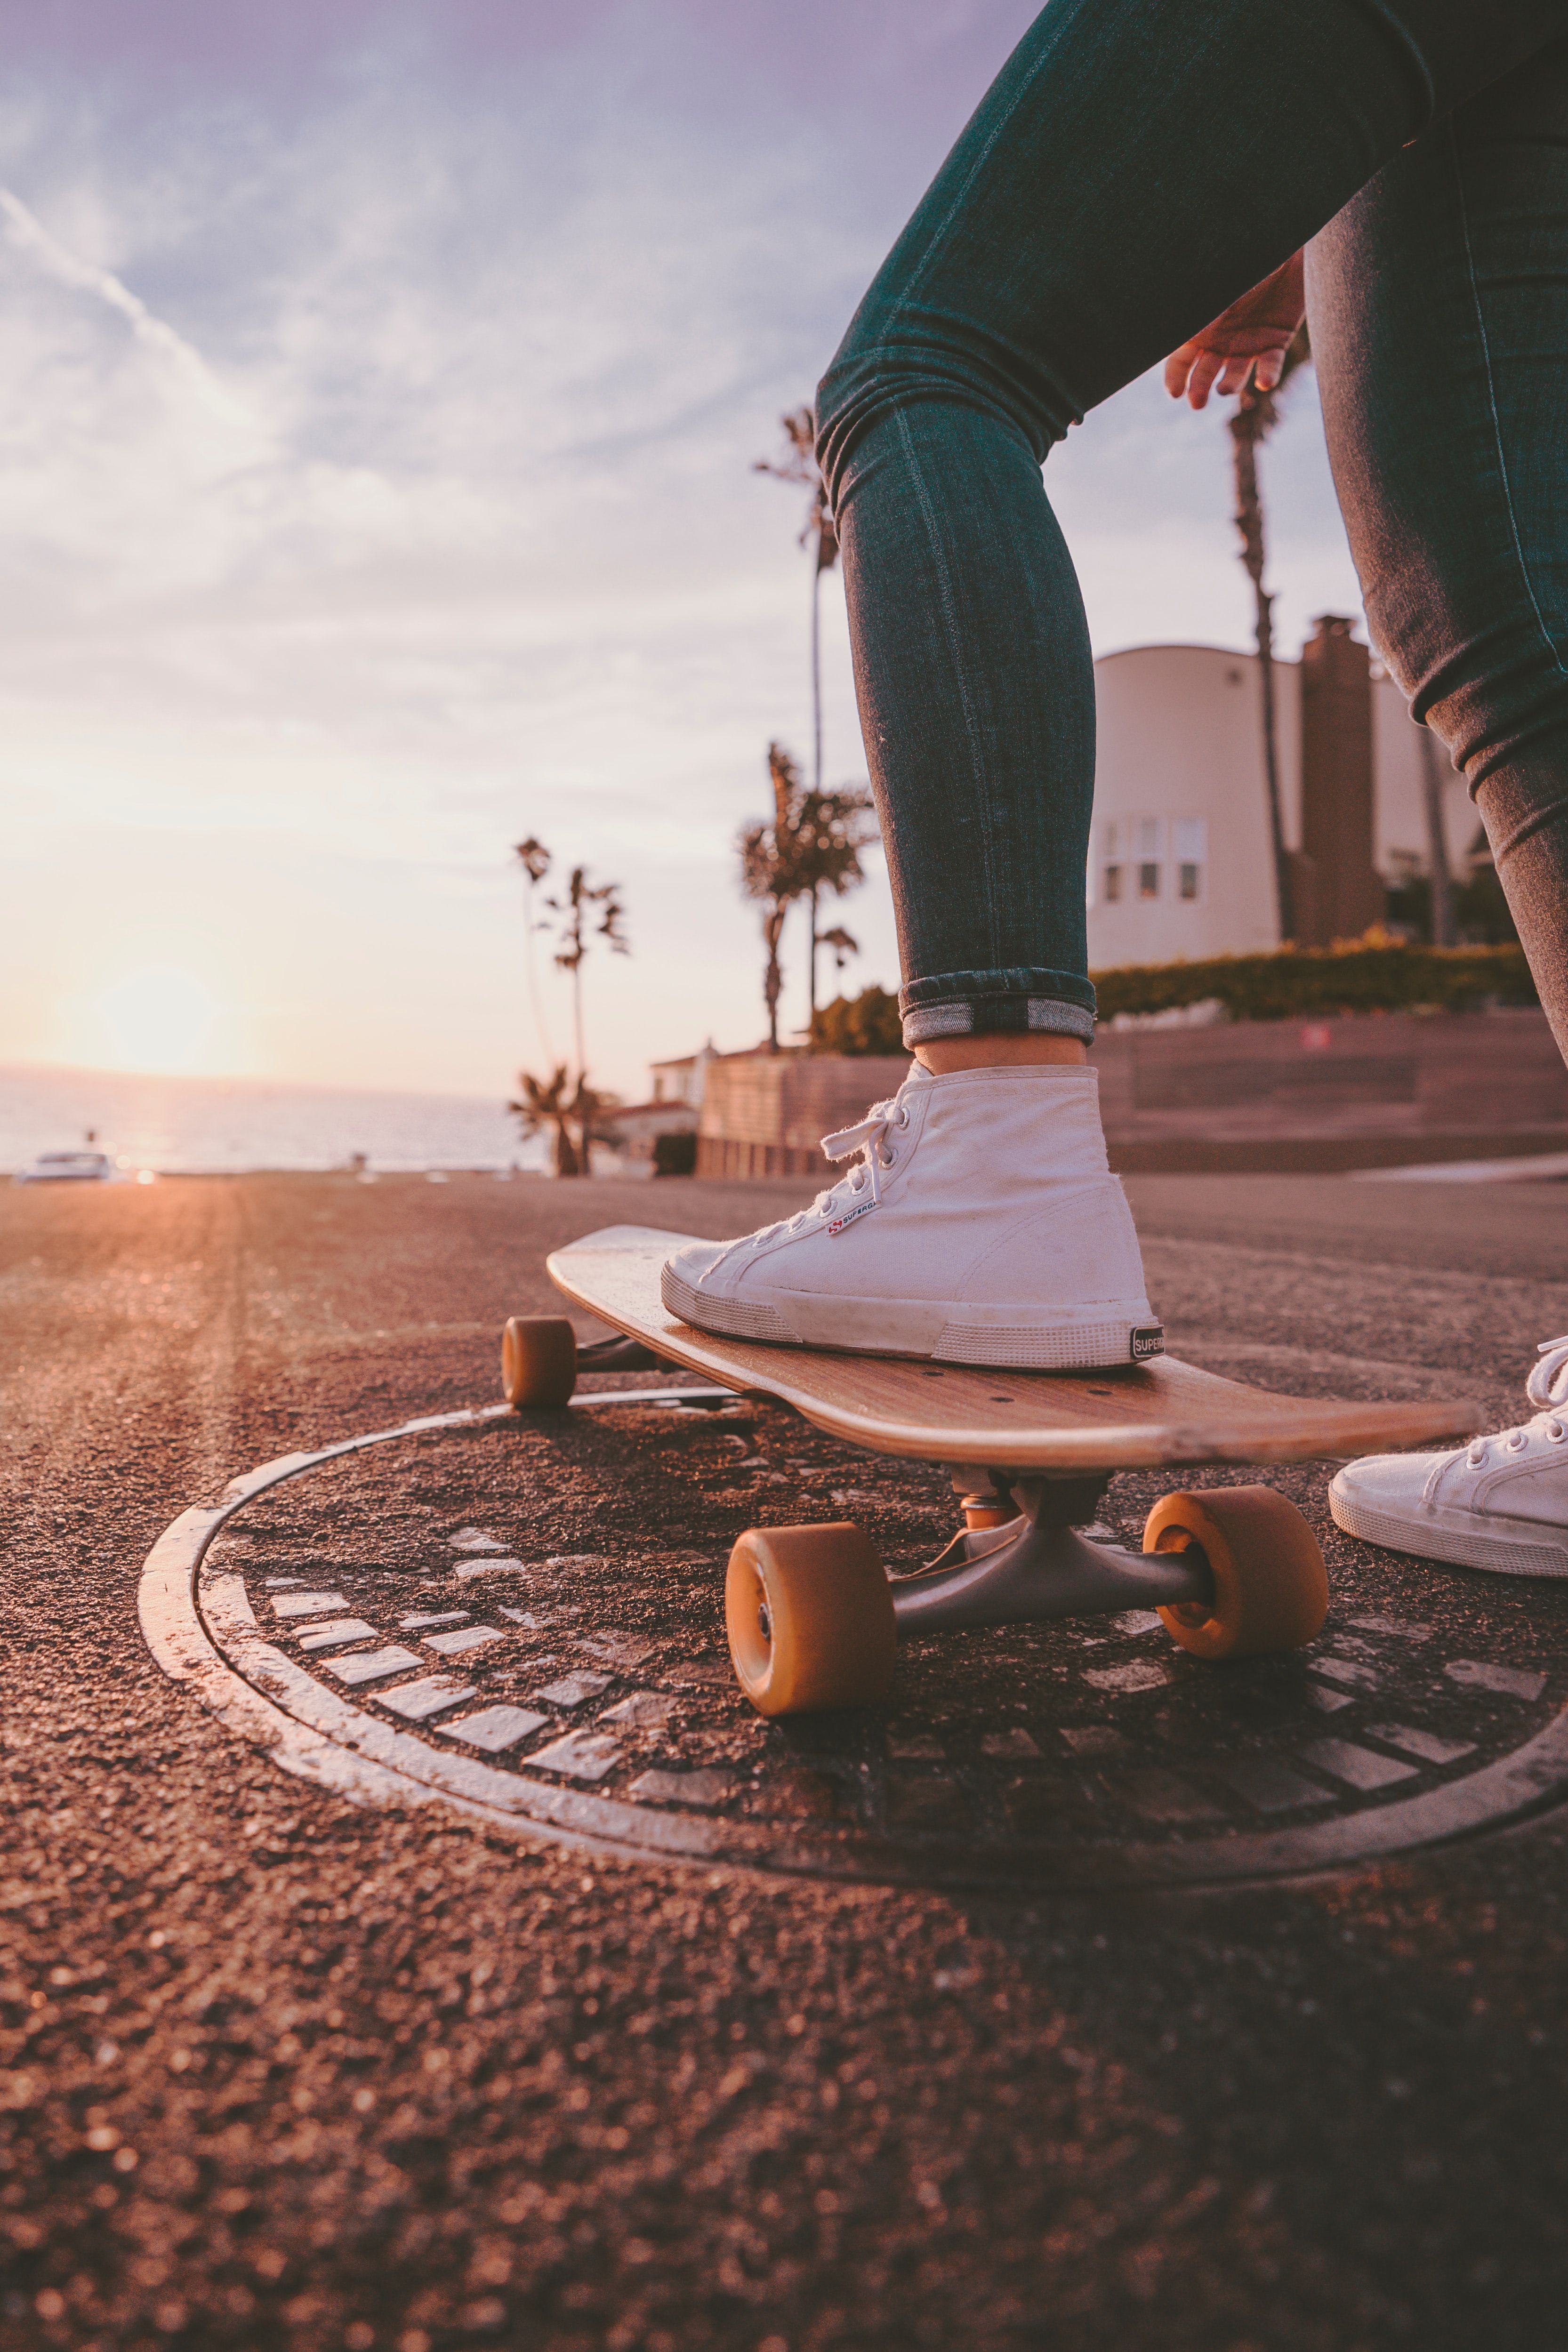 Skate Picture. Download Free Image